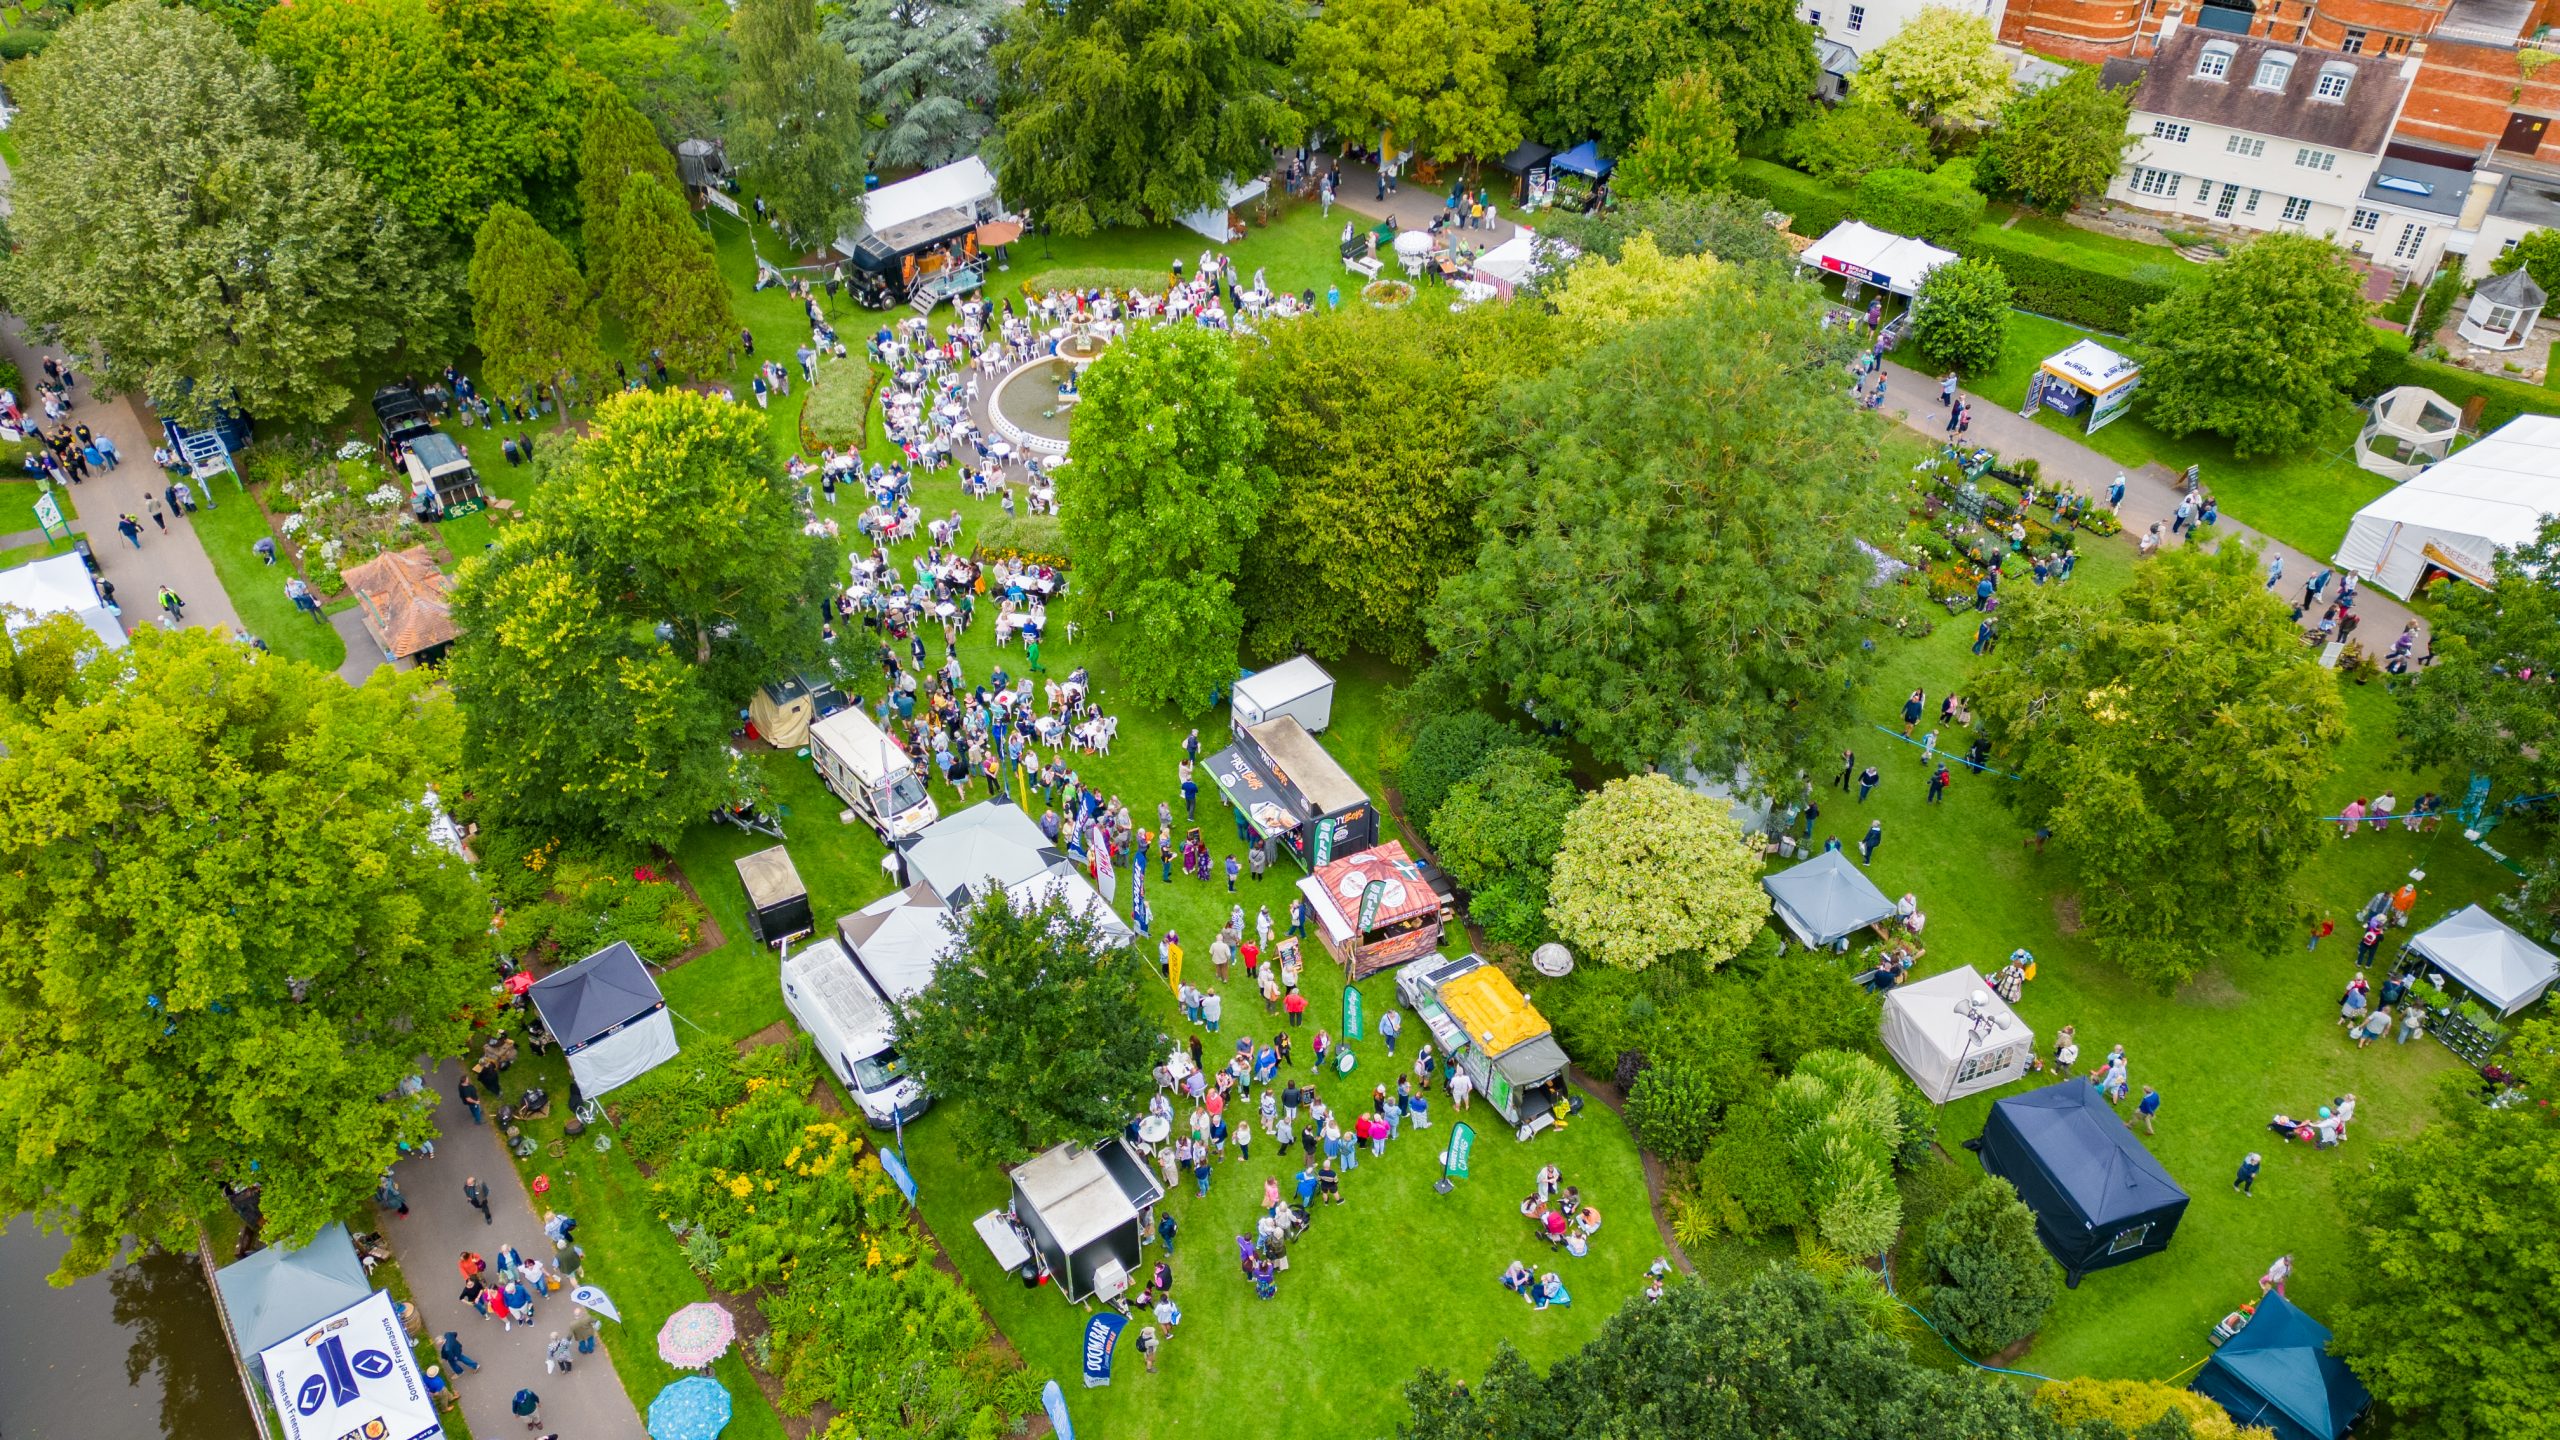 Drone view of the fountain area of Vivary Park with people milling about the catering area and views of the plant village and the bees and honey tent.